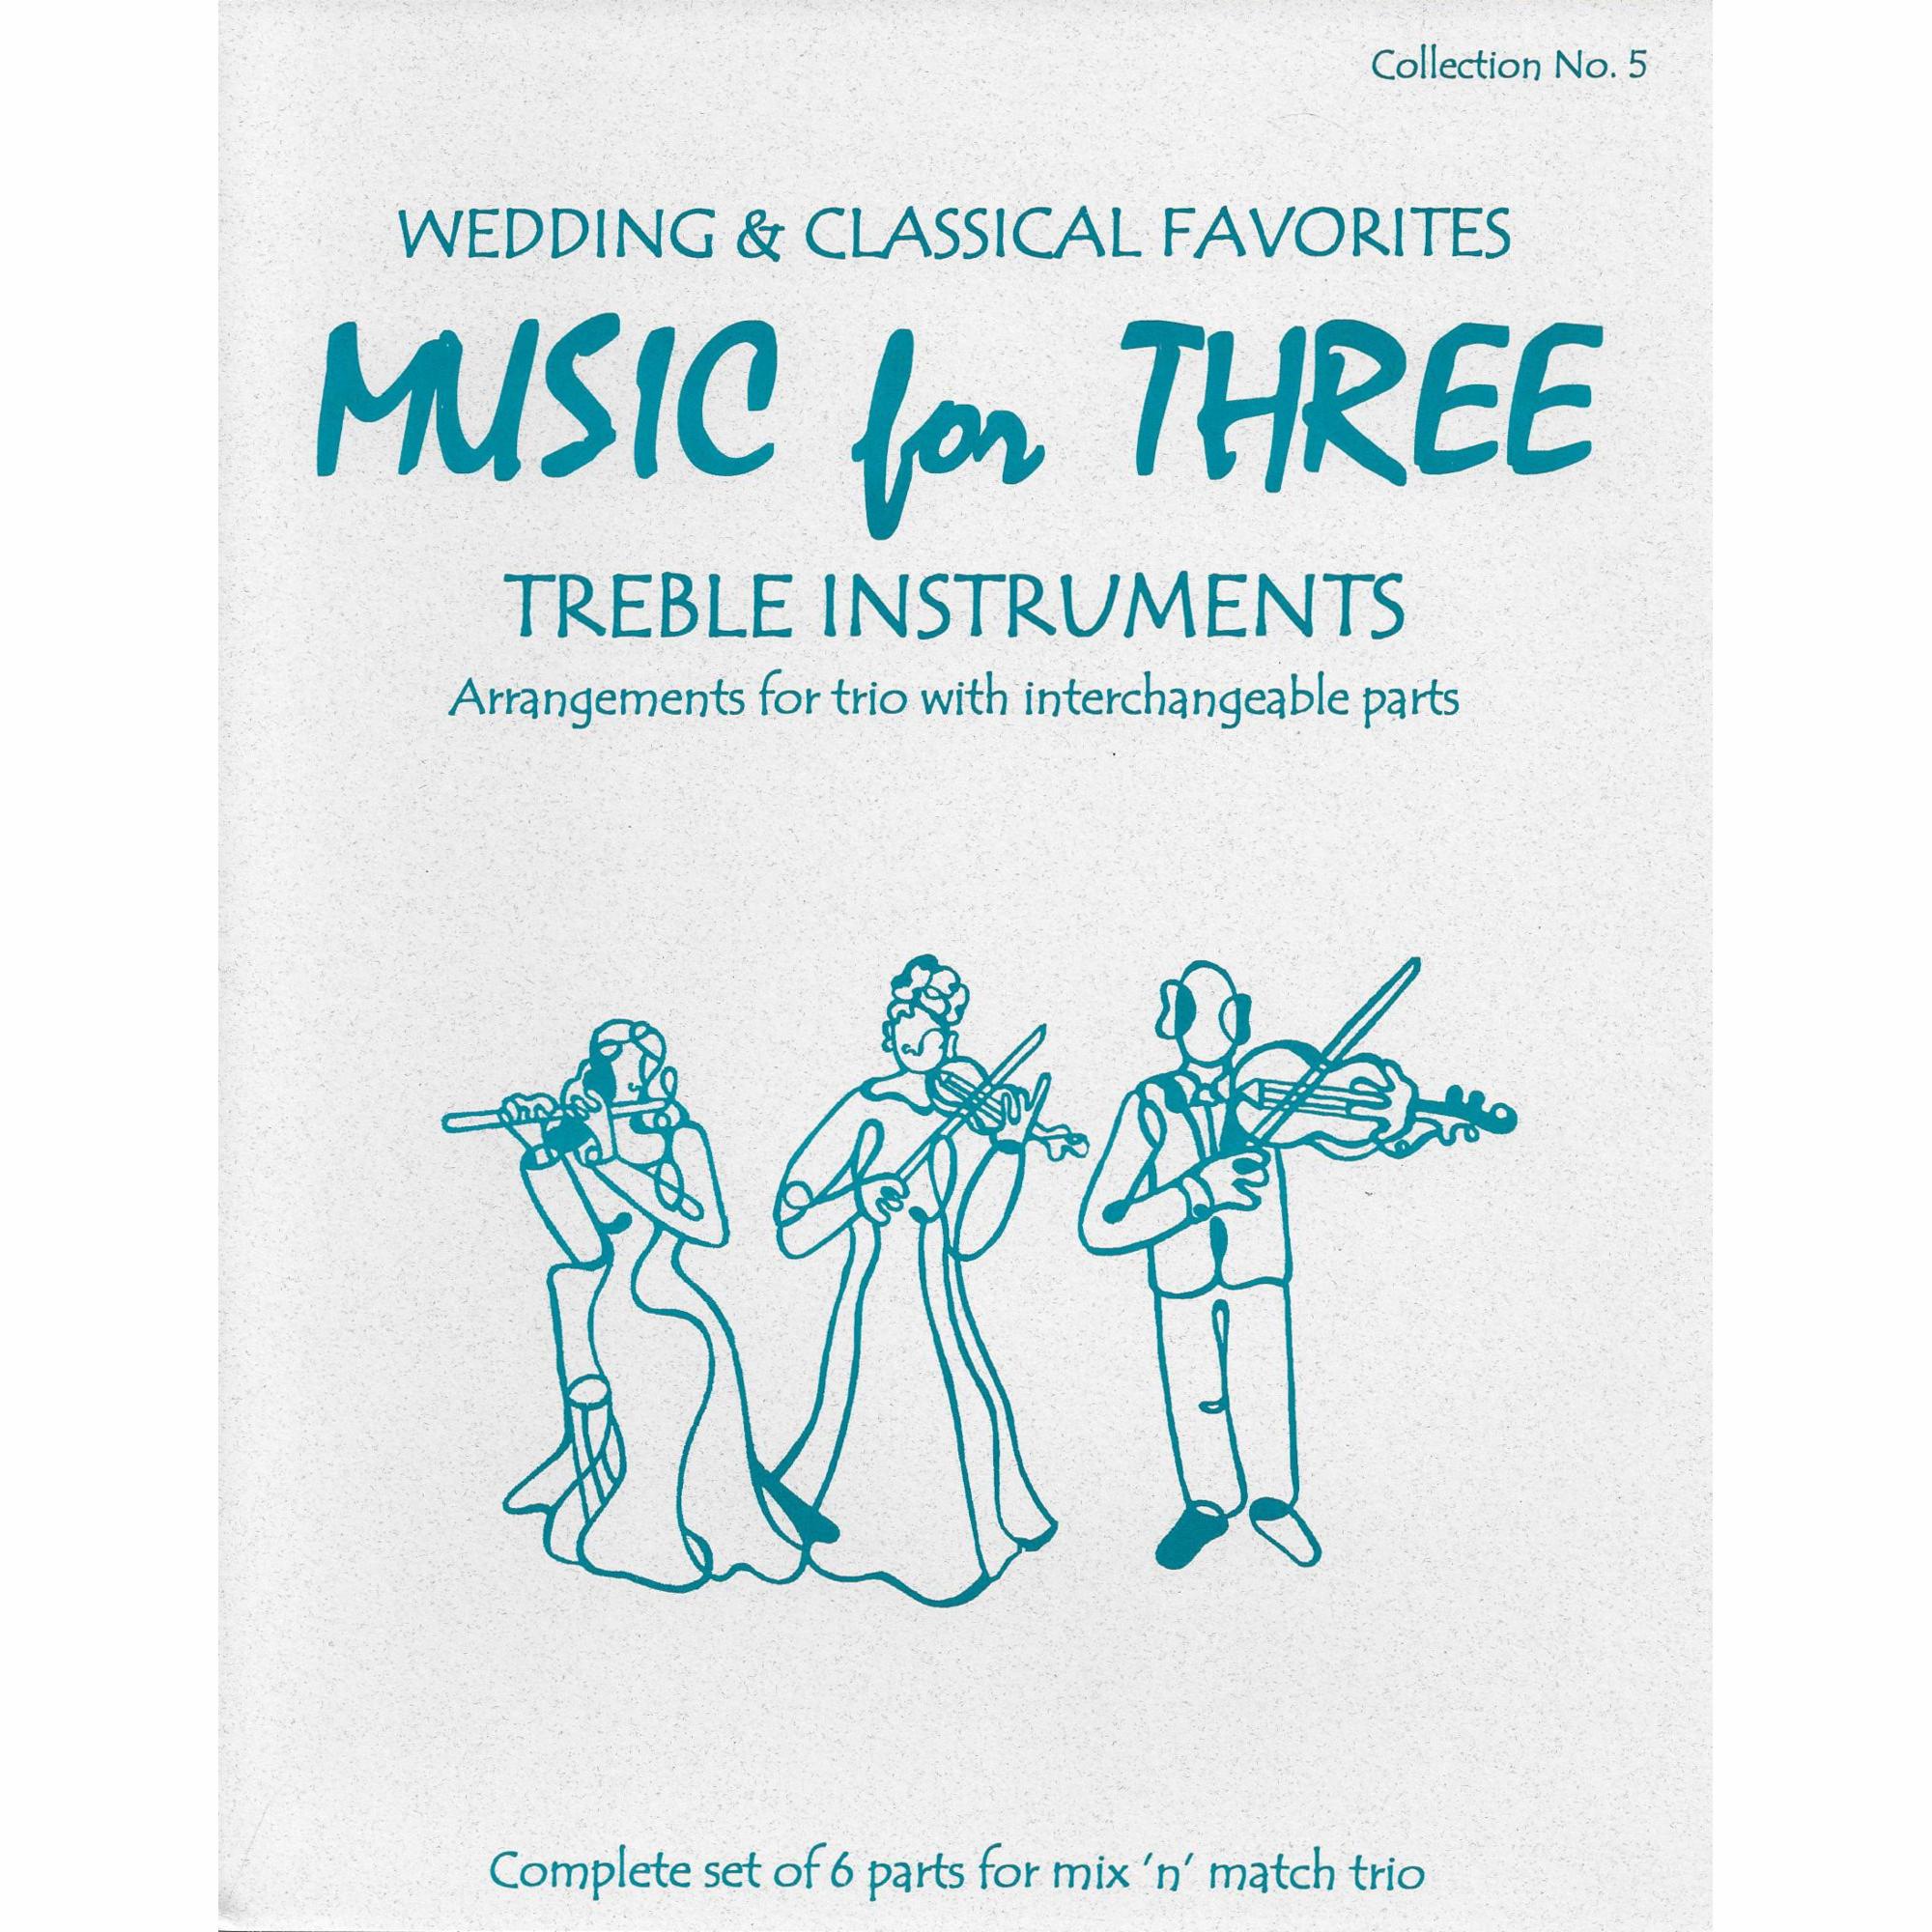 Music for Three Treble Instruments, Collection 5